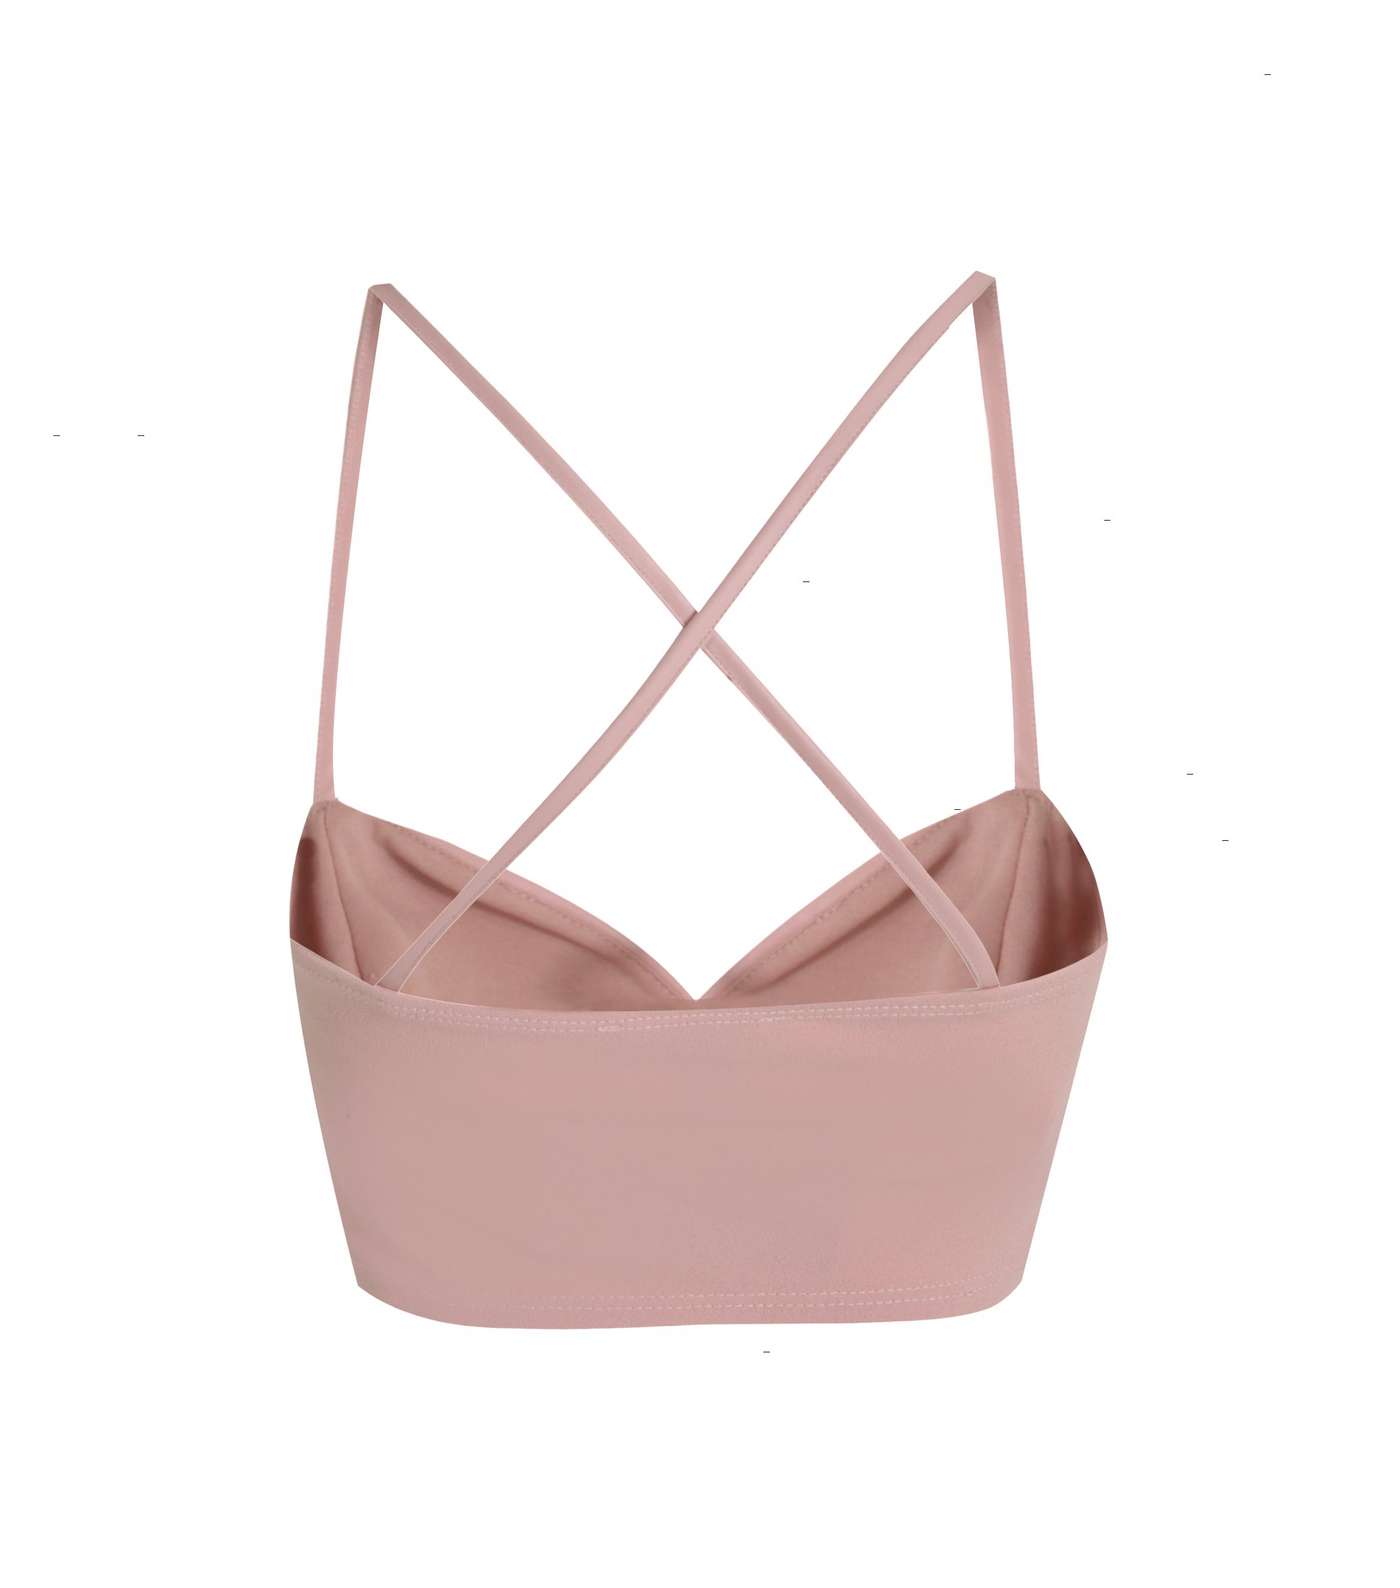 Pale Pink Leather-Look Cross Strap Bralette Image 2